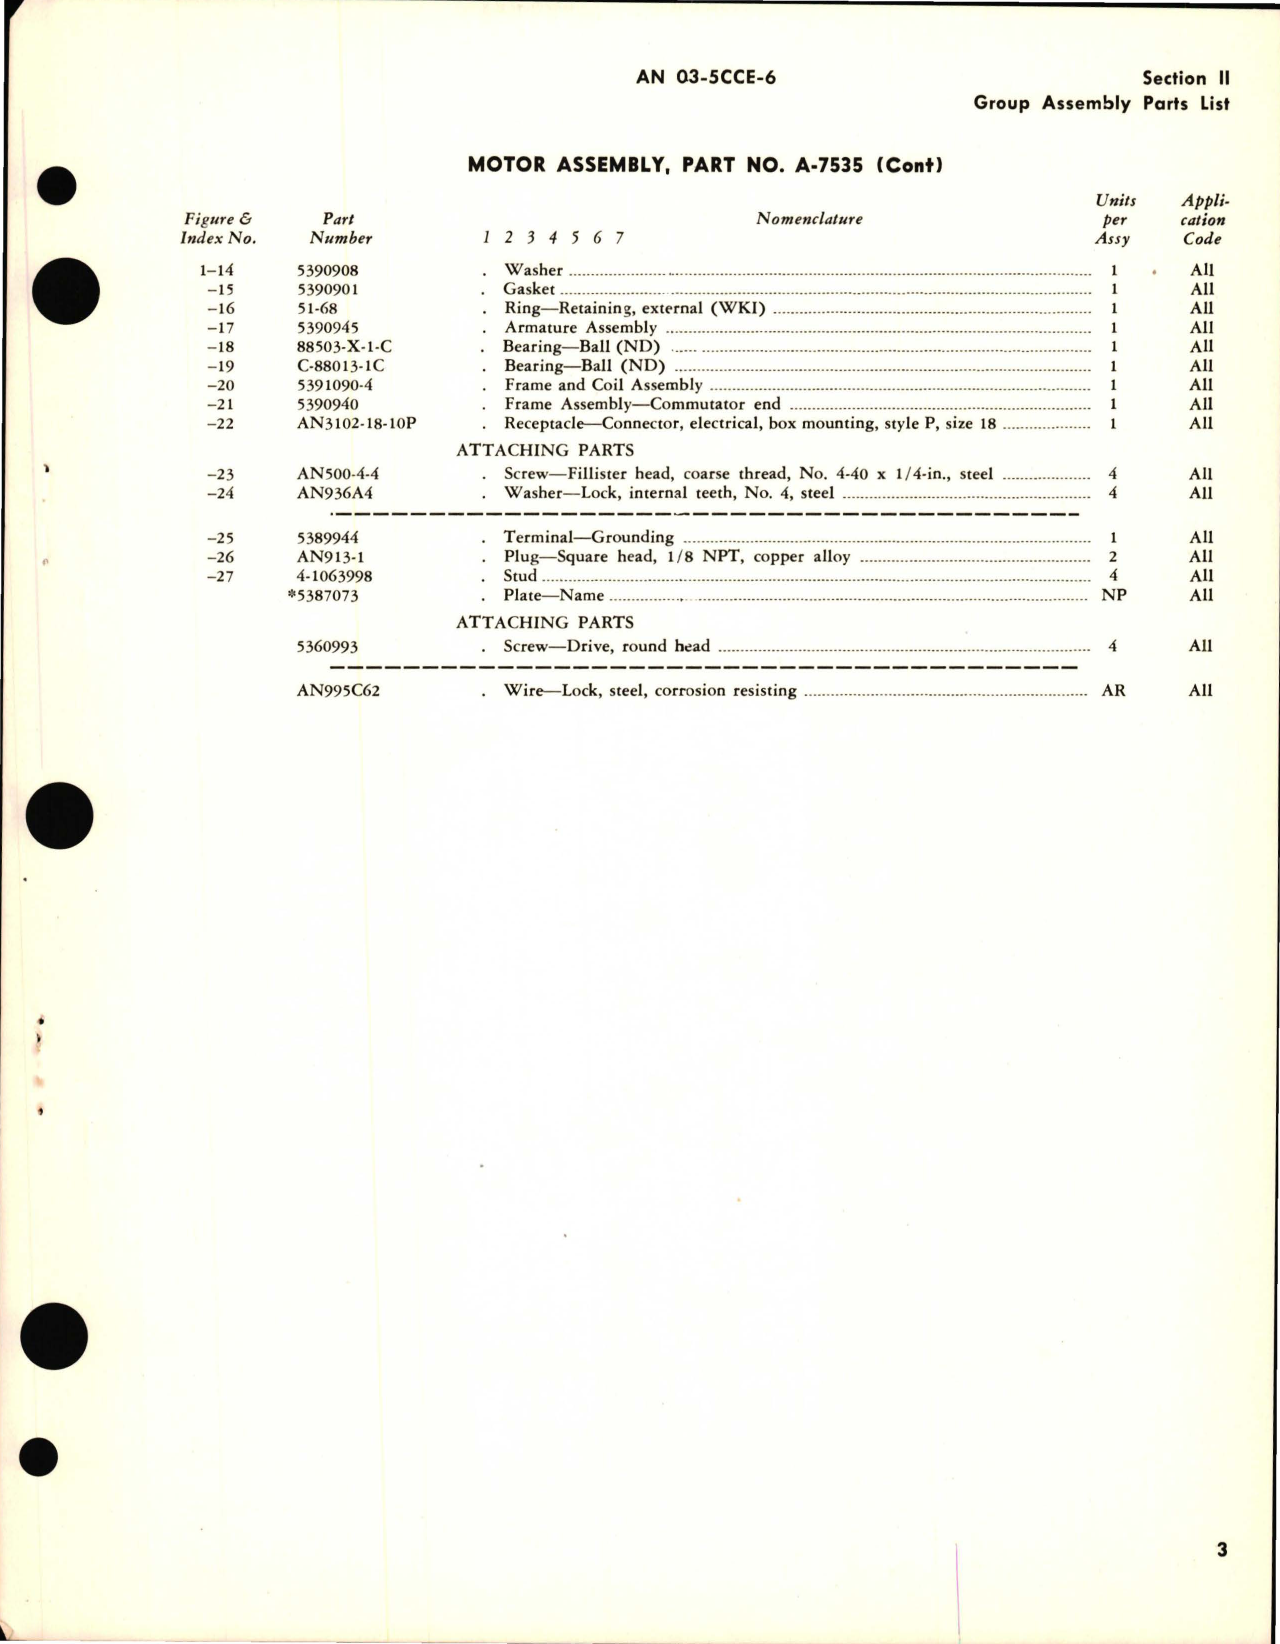 Sample page 5 from AirCorps Library document: Parts Catalog for Motor Assembly - Model A-7535 